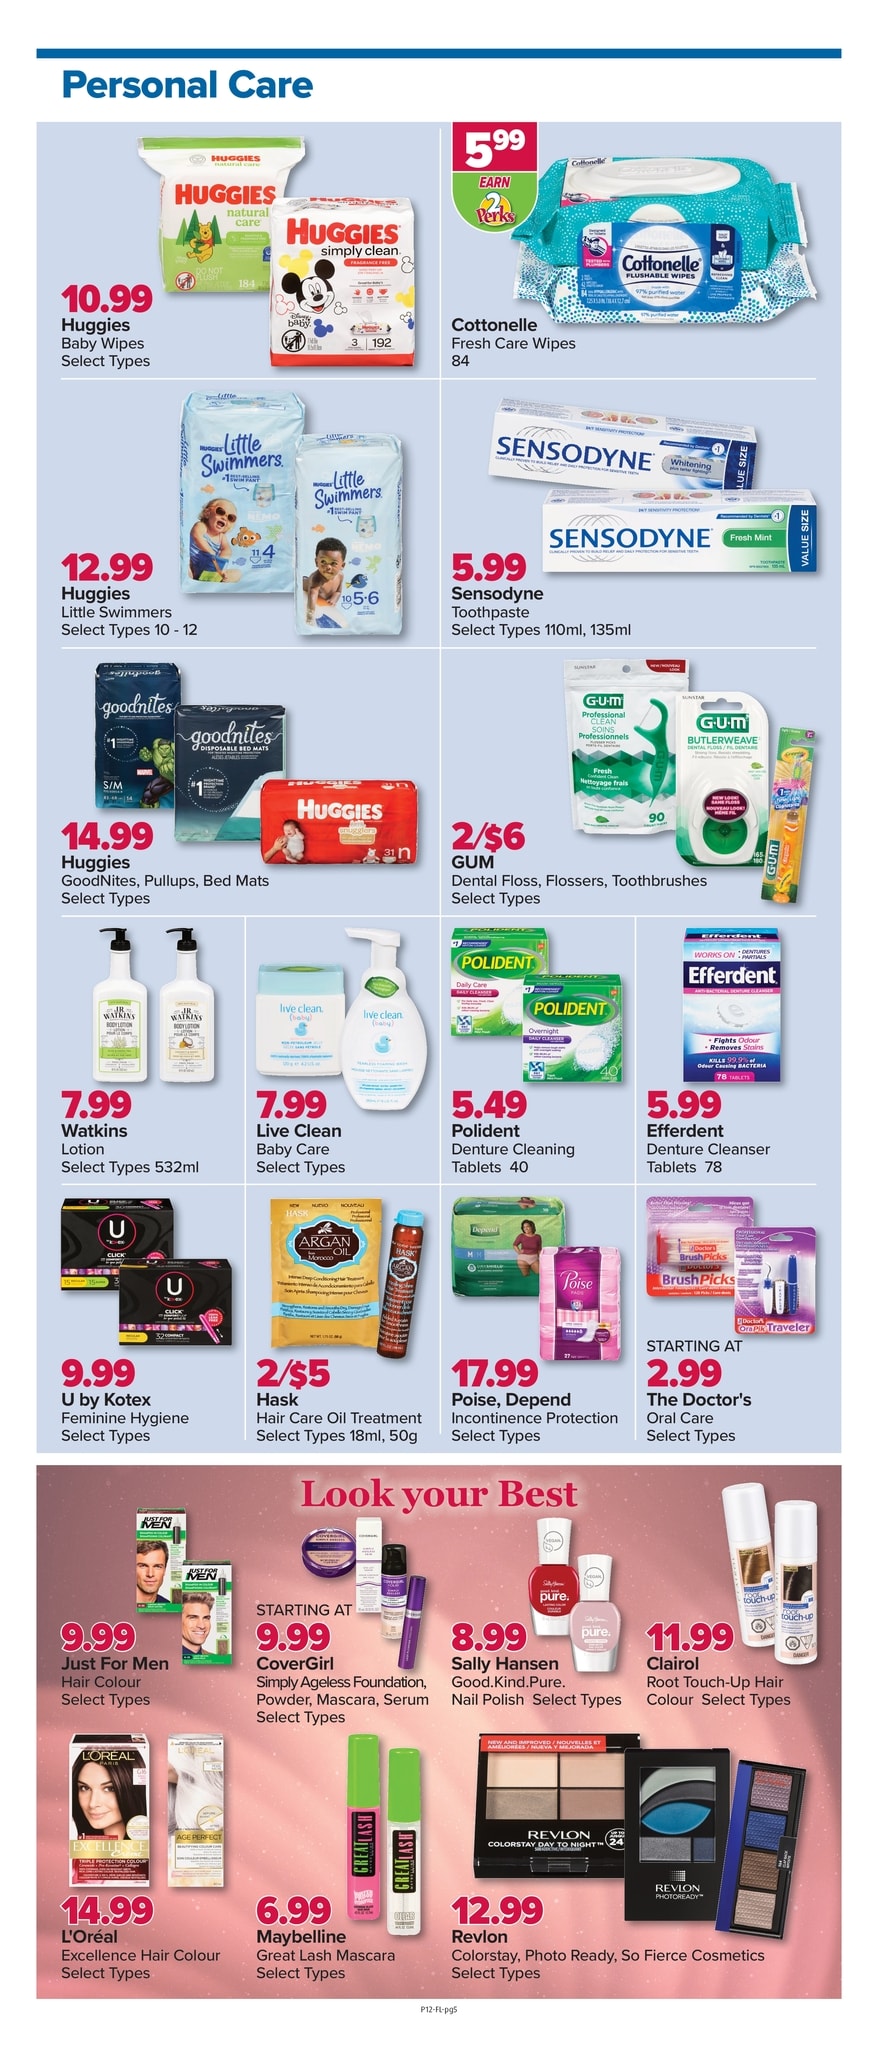 PharmaChoice - Weekly Flyer Specials - Page 5